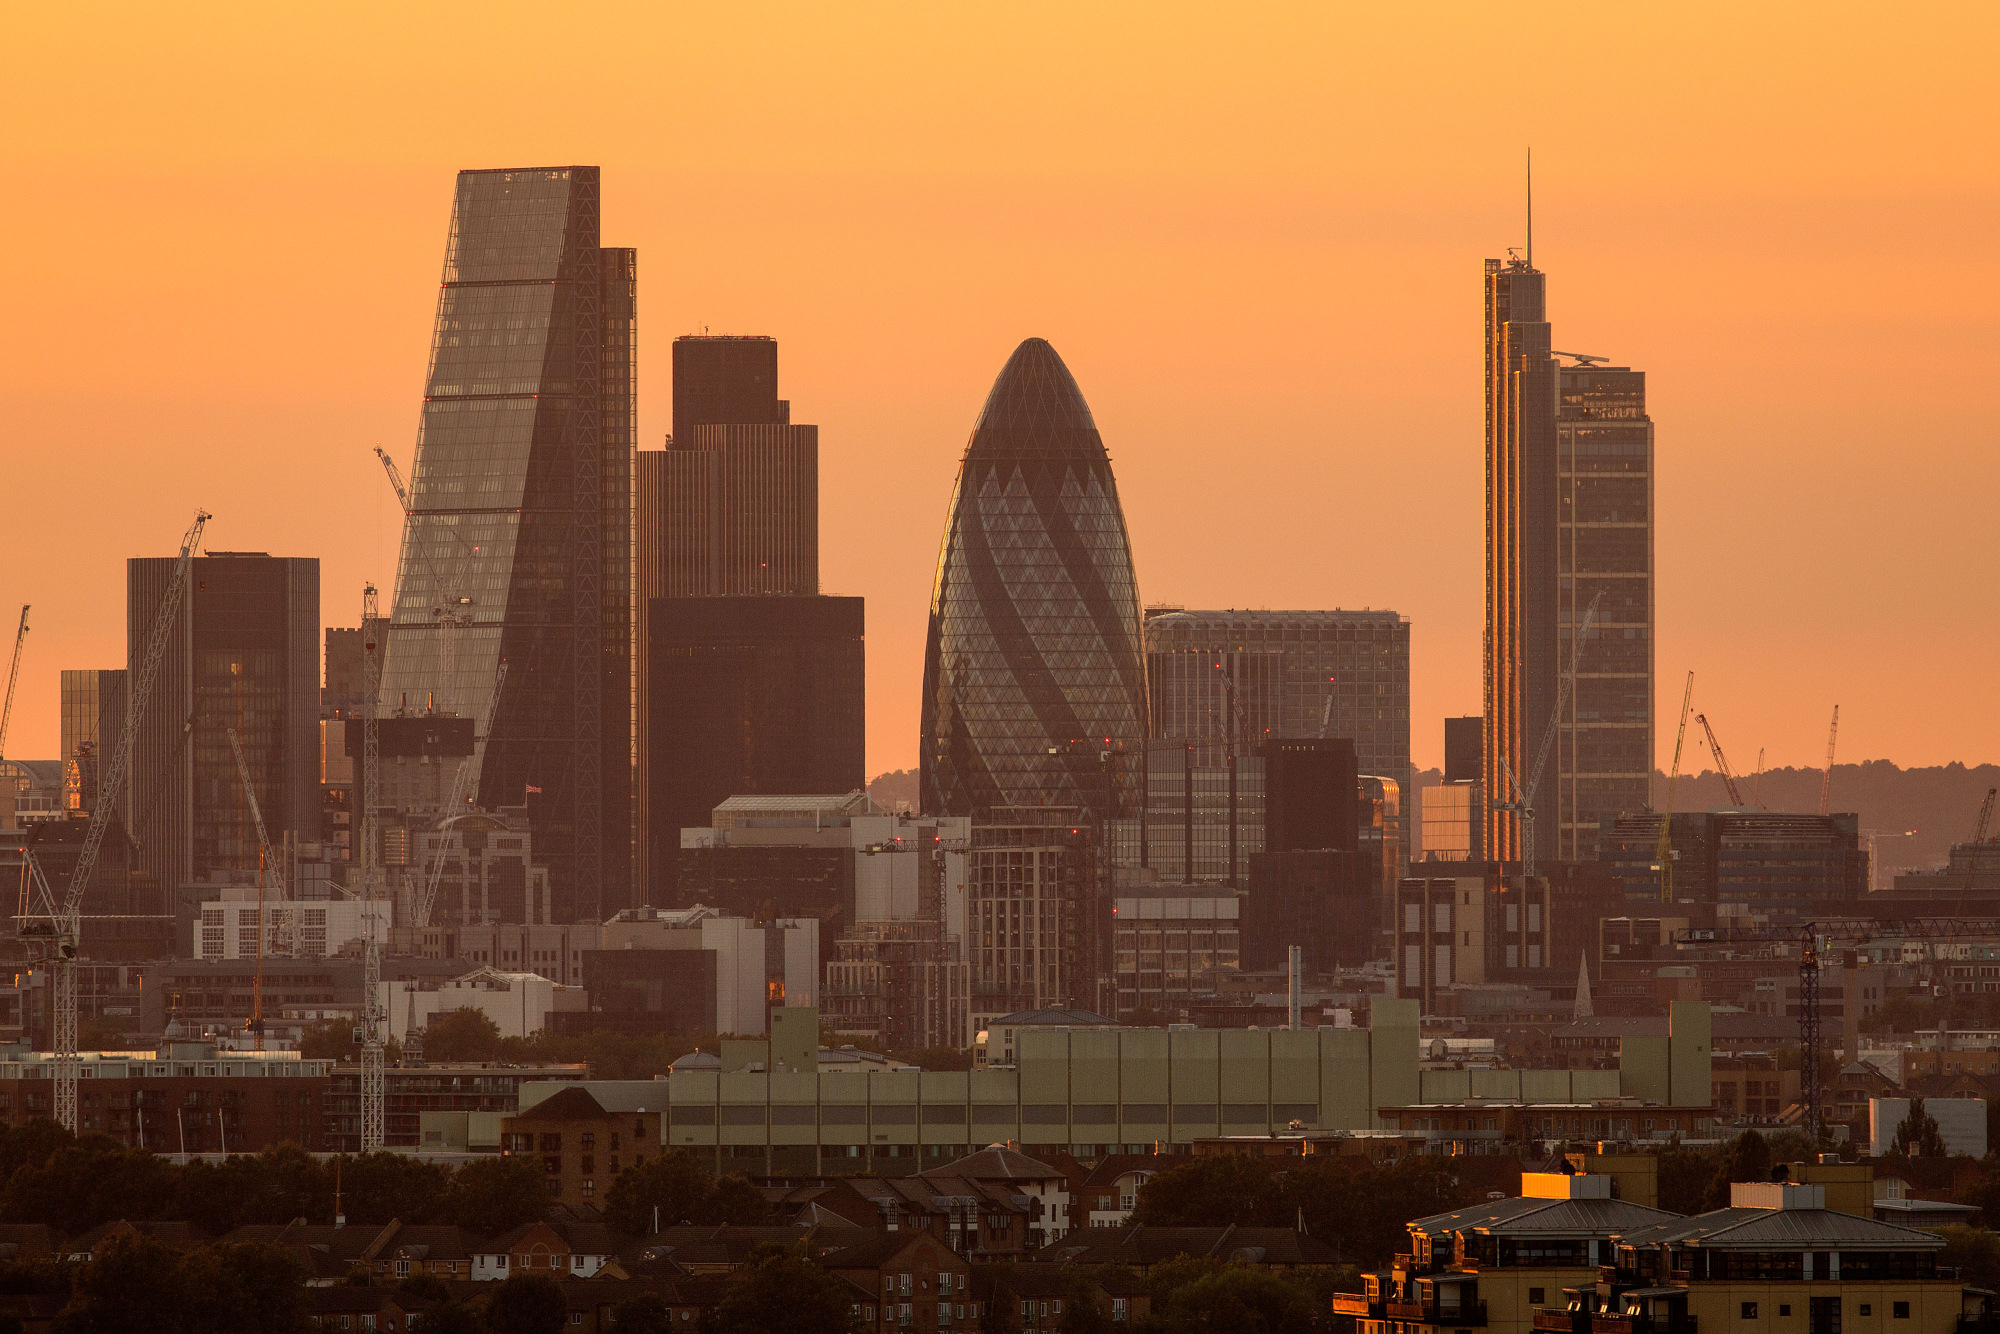 The sun sets on the horizon beyond skyscrapers including The Leadenhall Building, also known as the 'Cheesegrater,' left, Tower 42, second left, 30 St Mary Axe also known as 'the Gherkin,' center, and The Heron Tower, right, in the City of London, U.K.